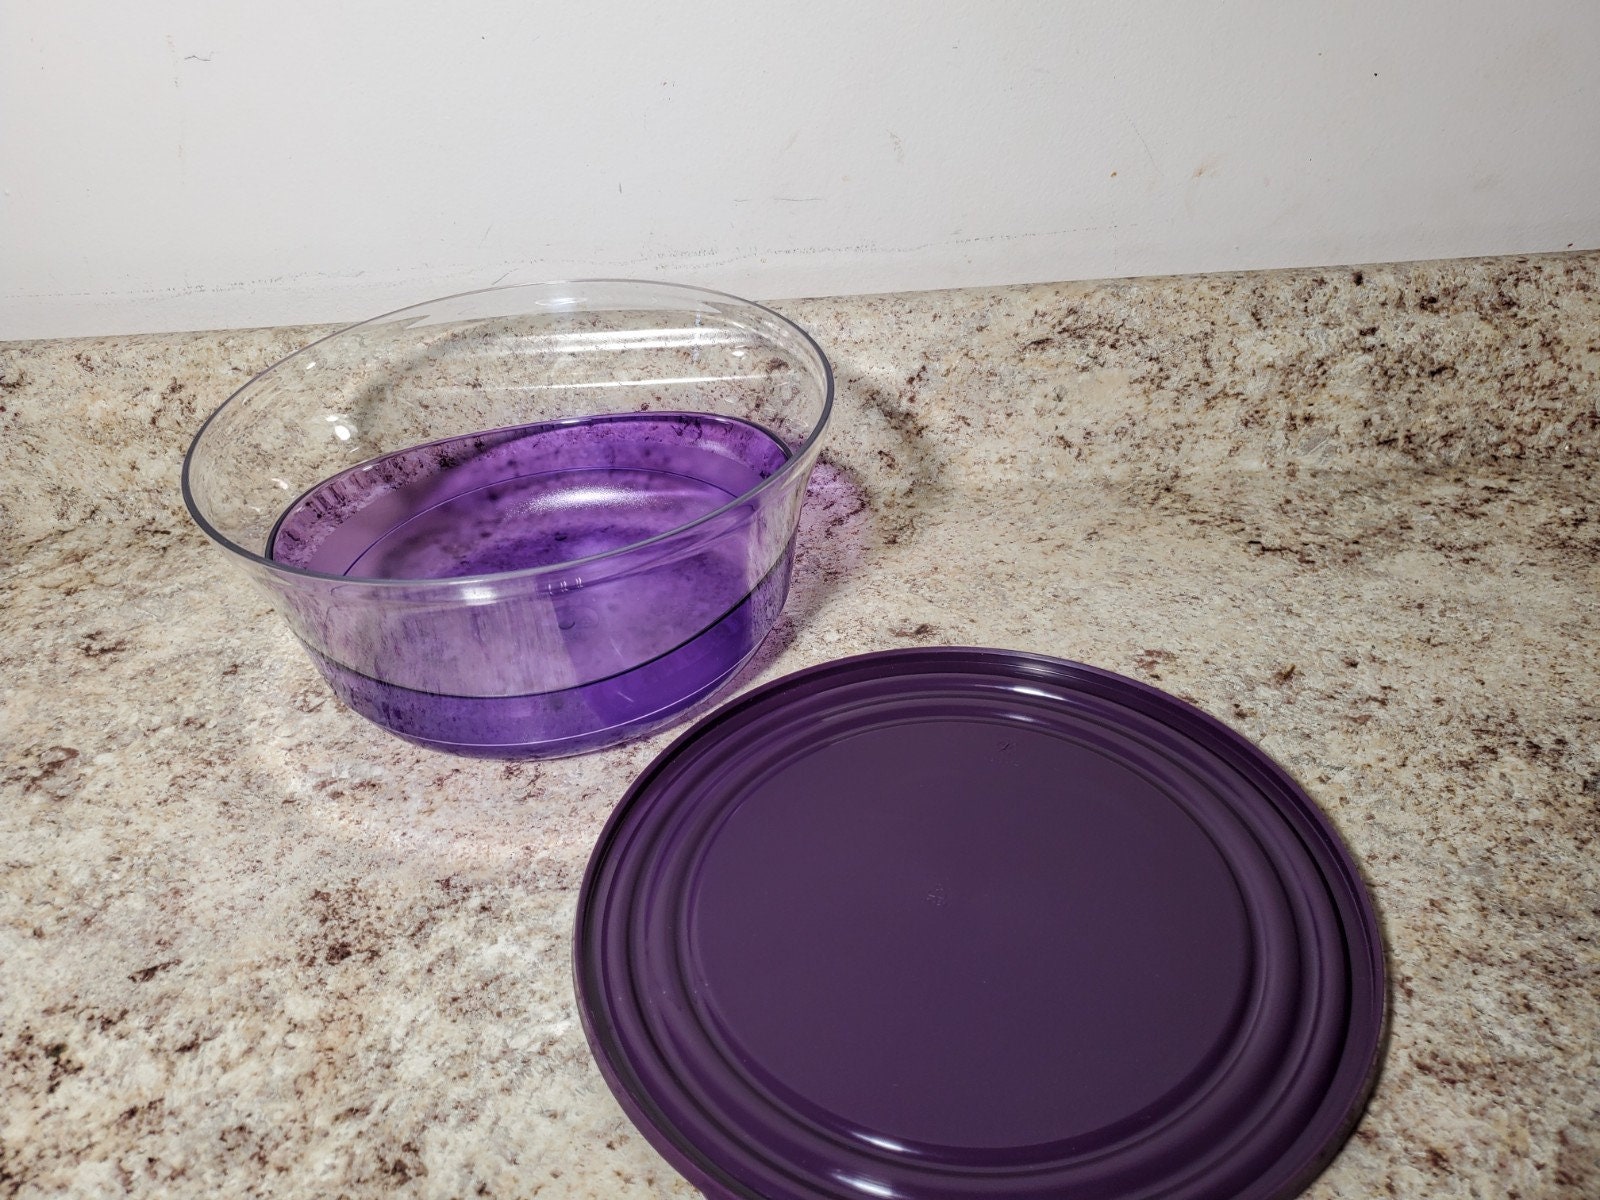 NEW Tupperware Insulated Serving Bowls Collection Set - Purple & White